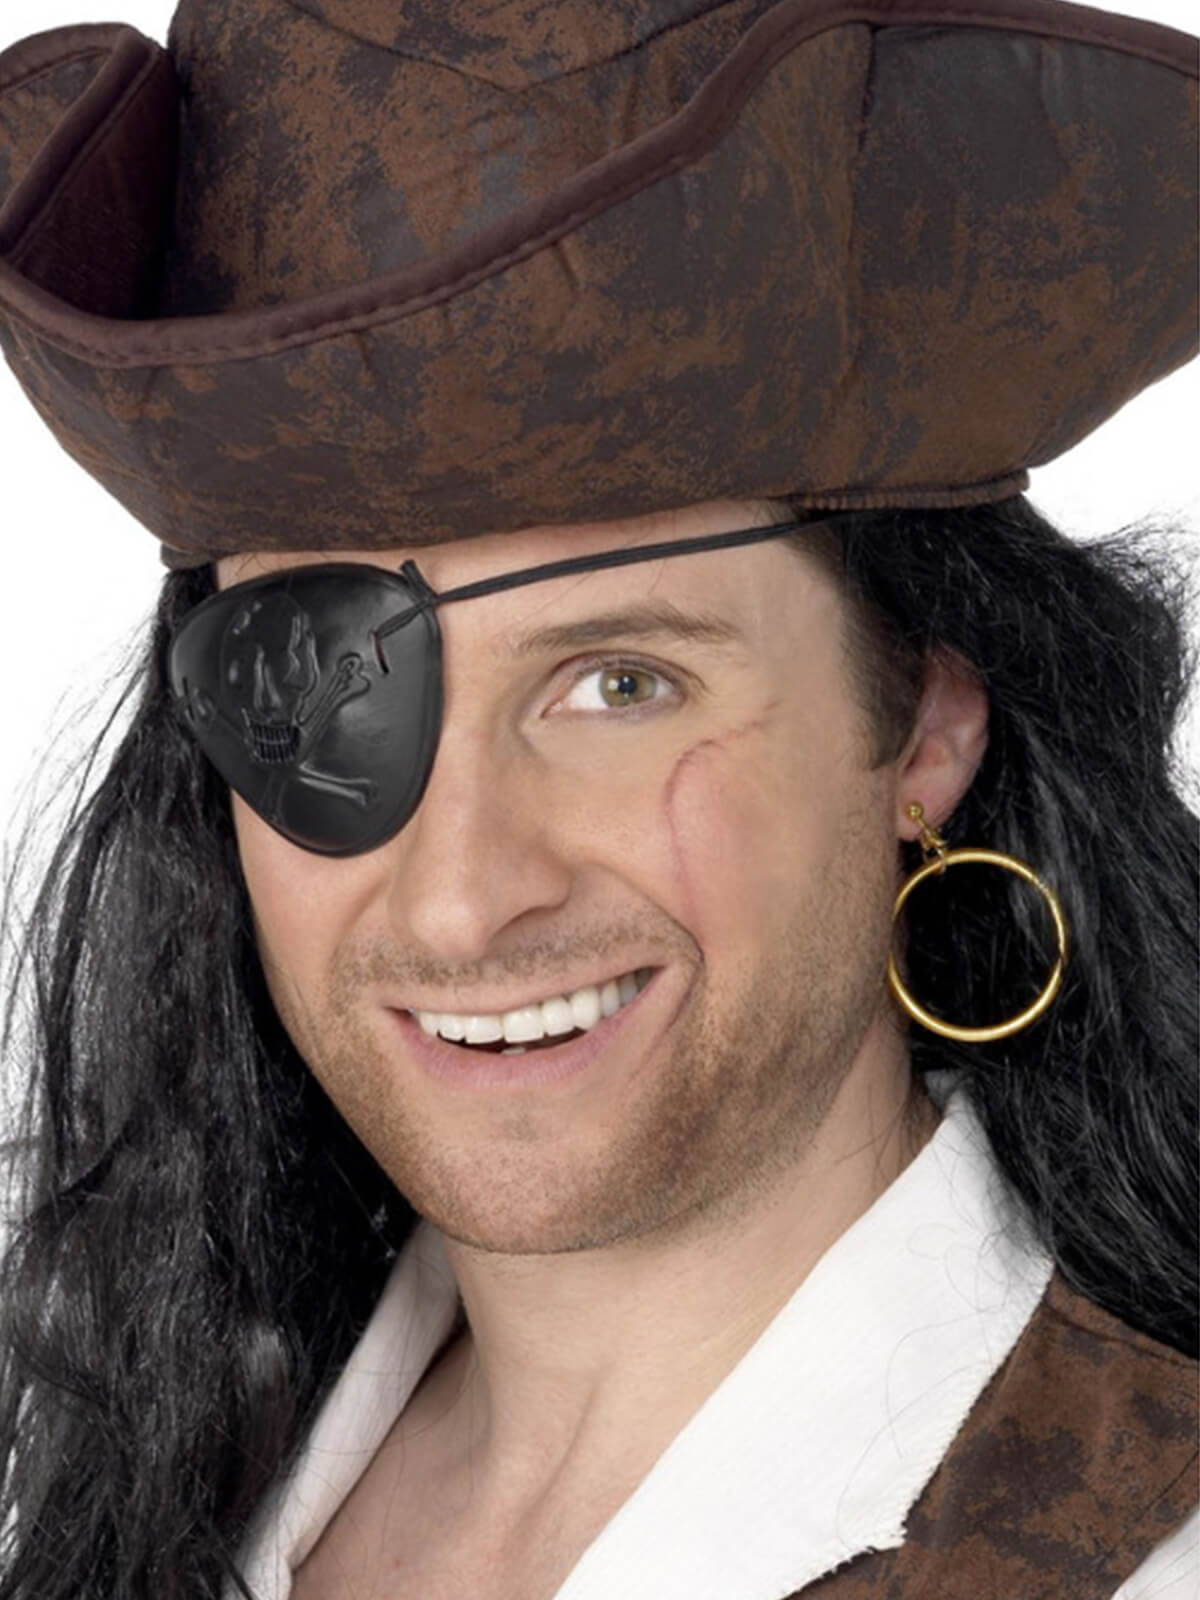 Pirate Eyepatch and